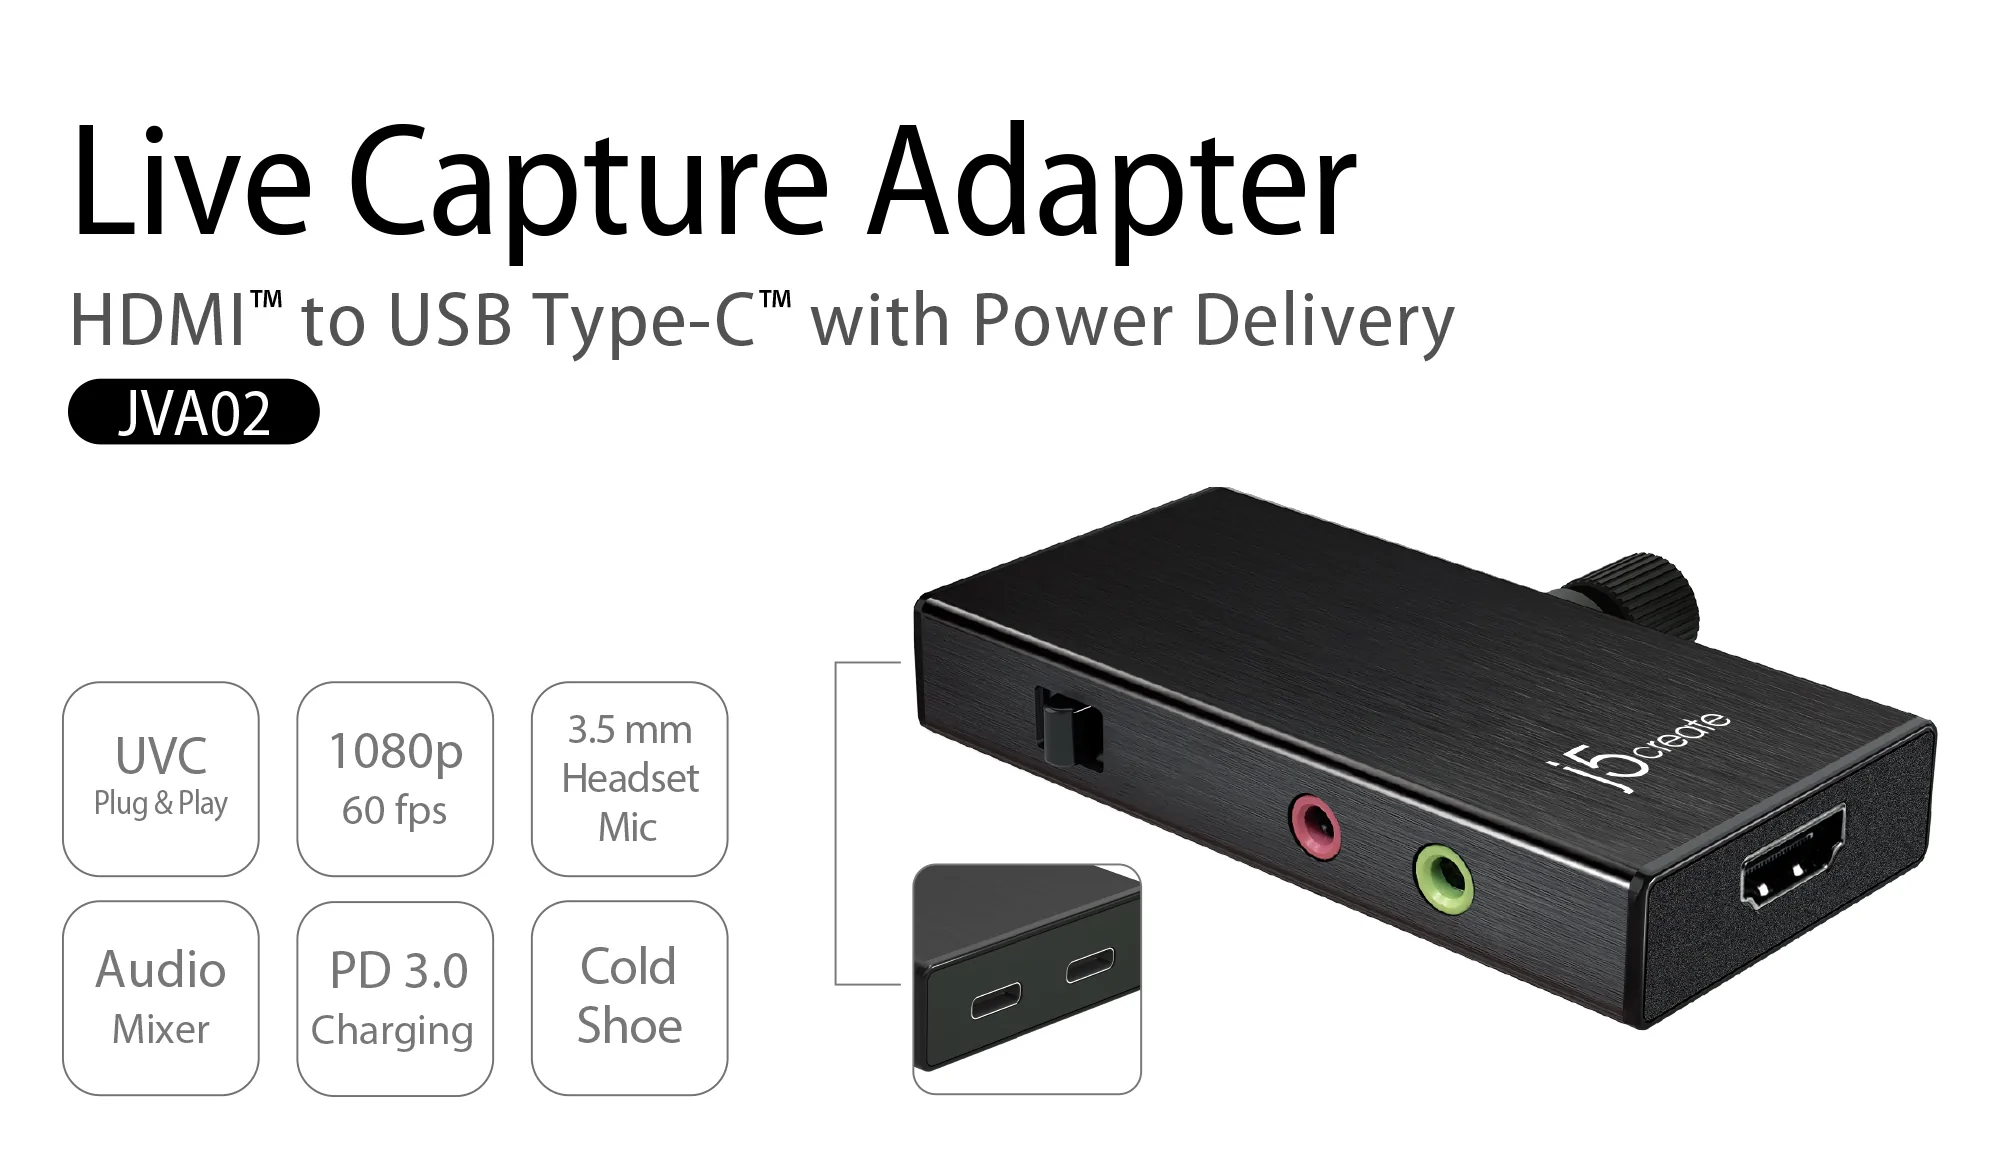 J5 Create Live Capture Adapter HDMI to USB C with Power Delivery - JVA02